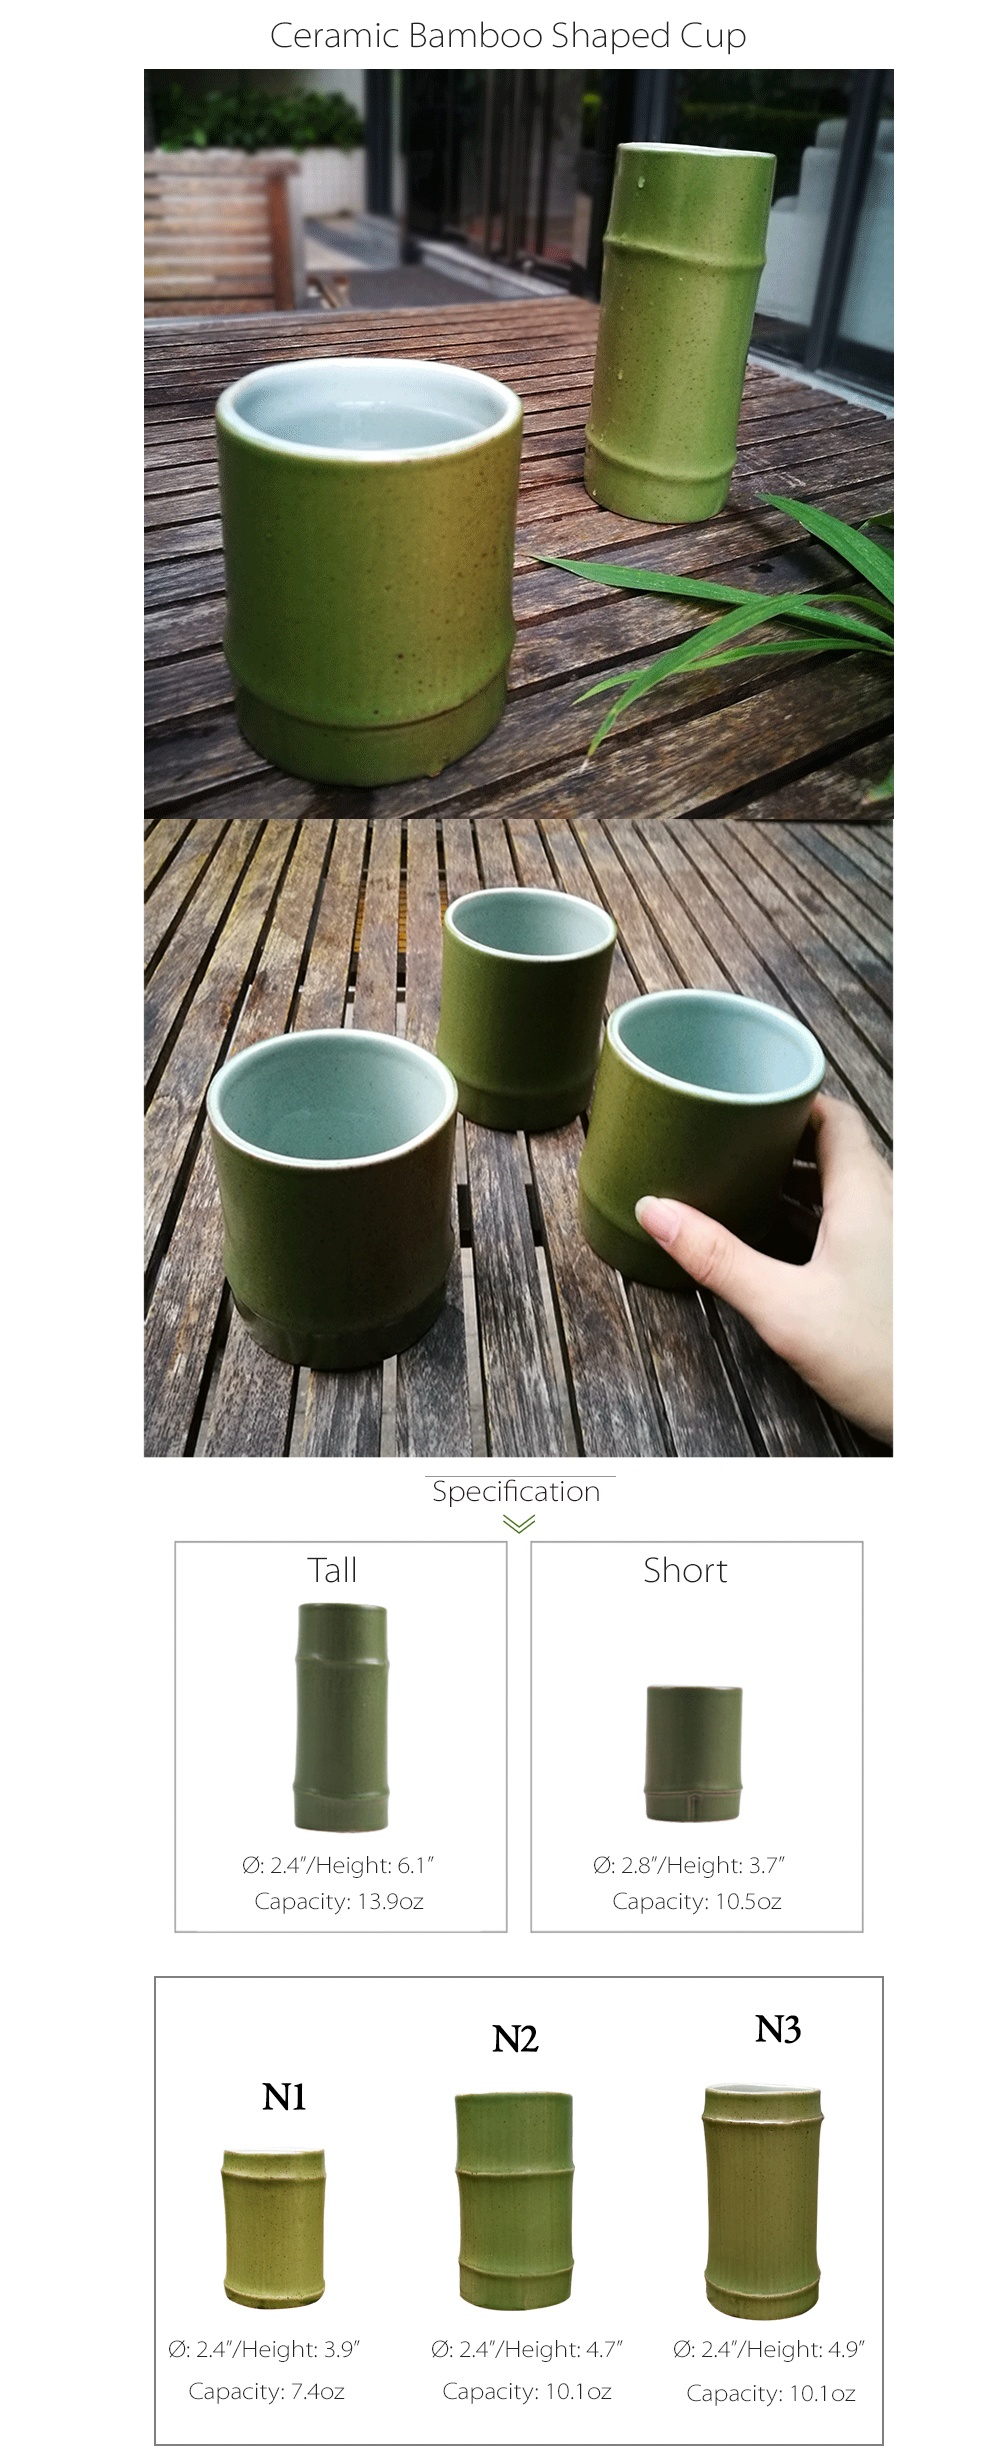 https://rs.apolloboxassets.com/images/sku1764-Bamboo-Shaped-Cup/Detail_1.jpg